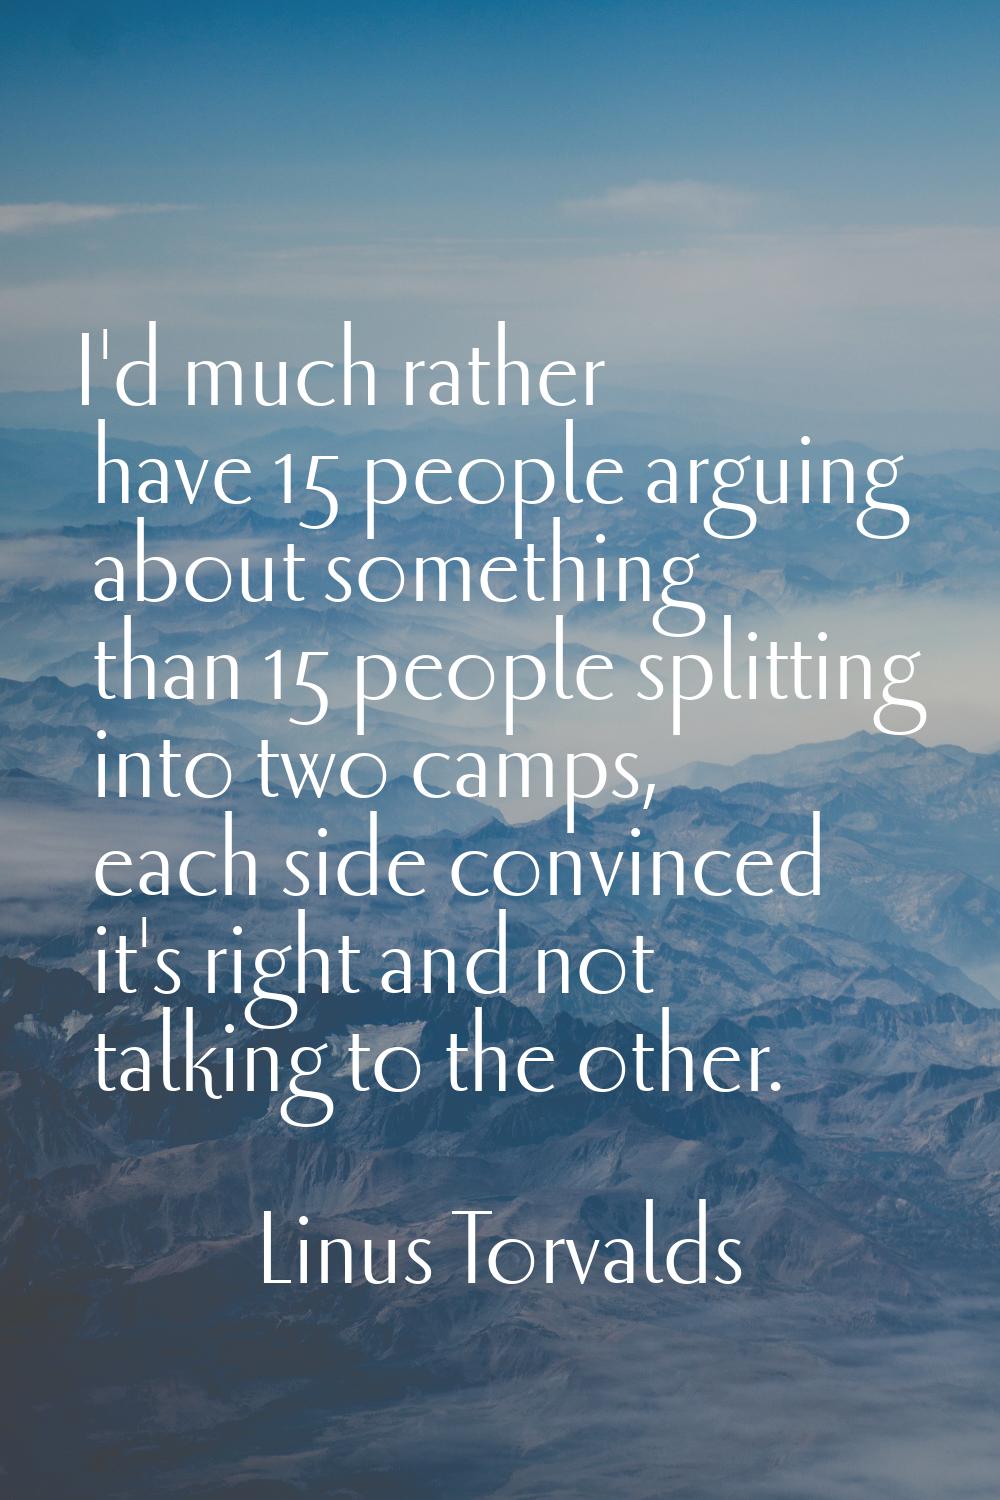 I'd much rather have 15 people arguing about something than 15 people splitting into two camps, eac